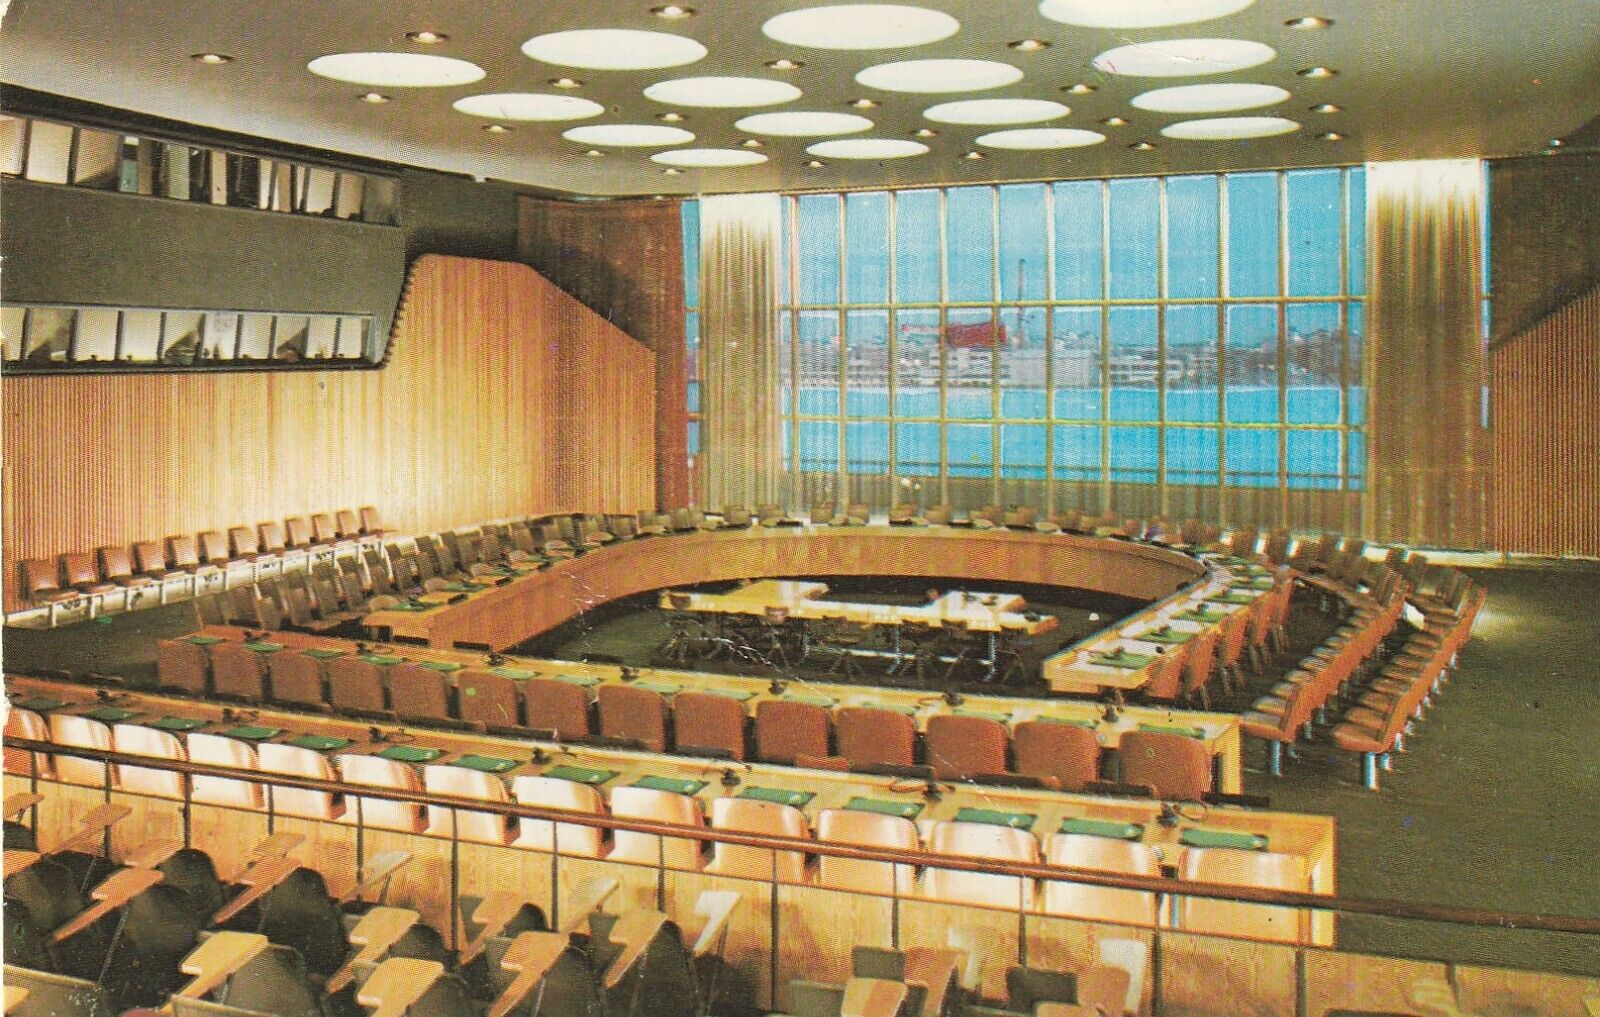 Postcard Economic and Social Council Chamber United Nations Headquarters NY USA